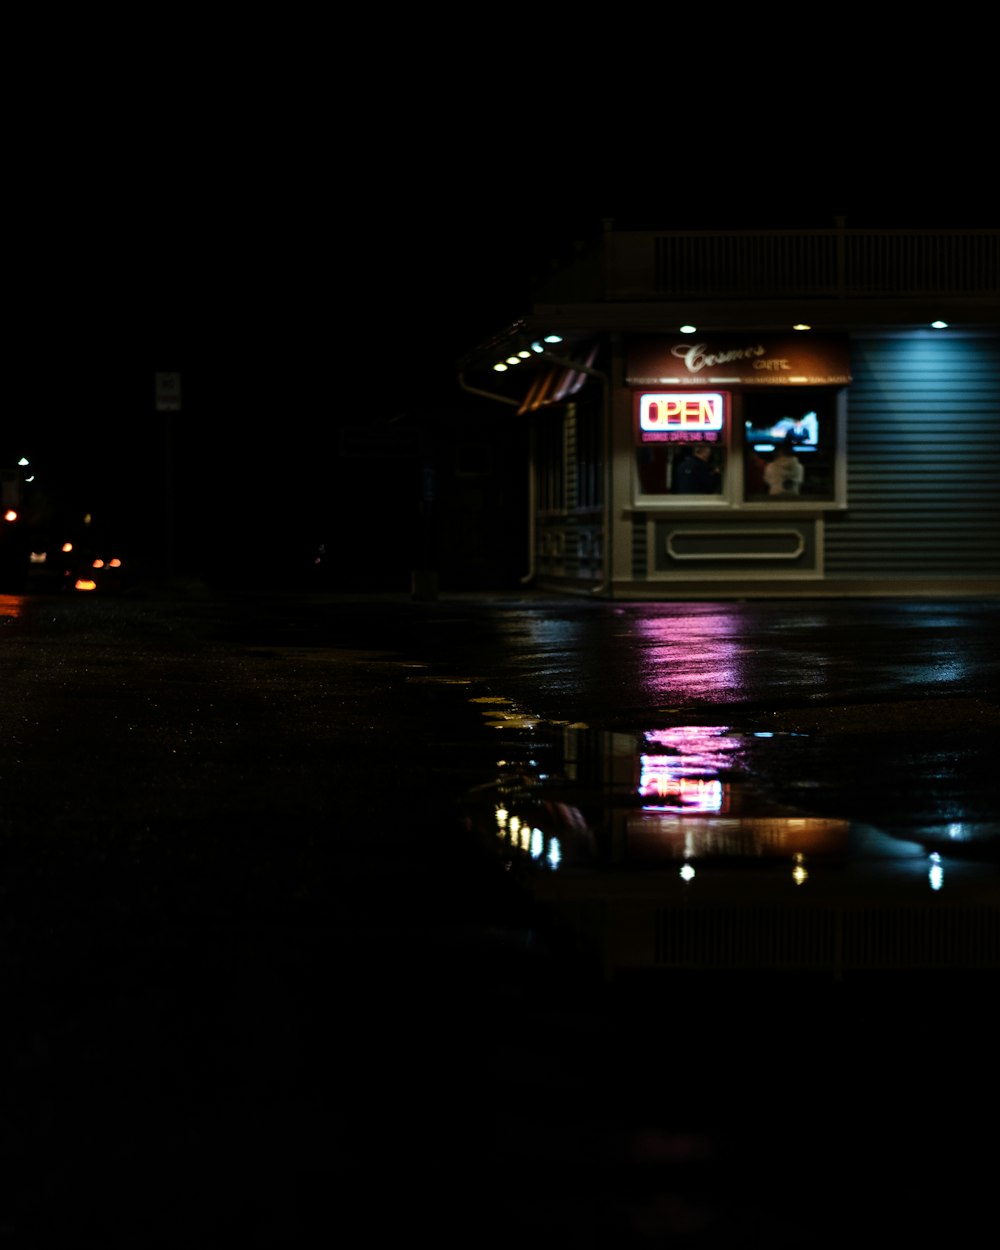 A store in the dark and a puddle reflecting the neon lights from the storefront window